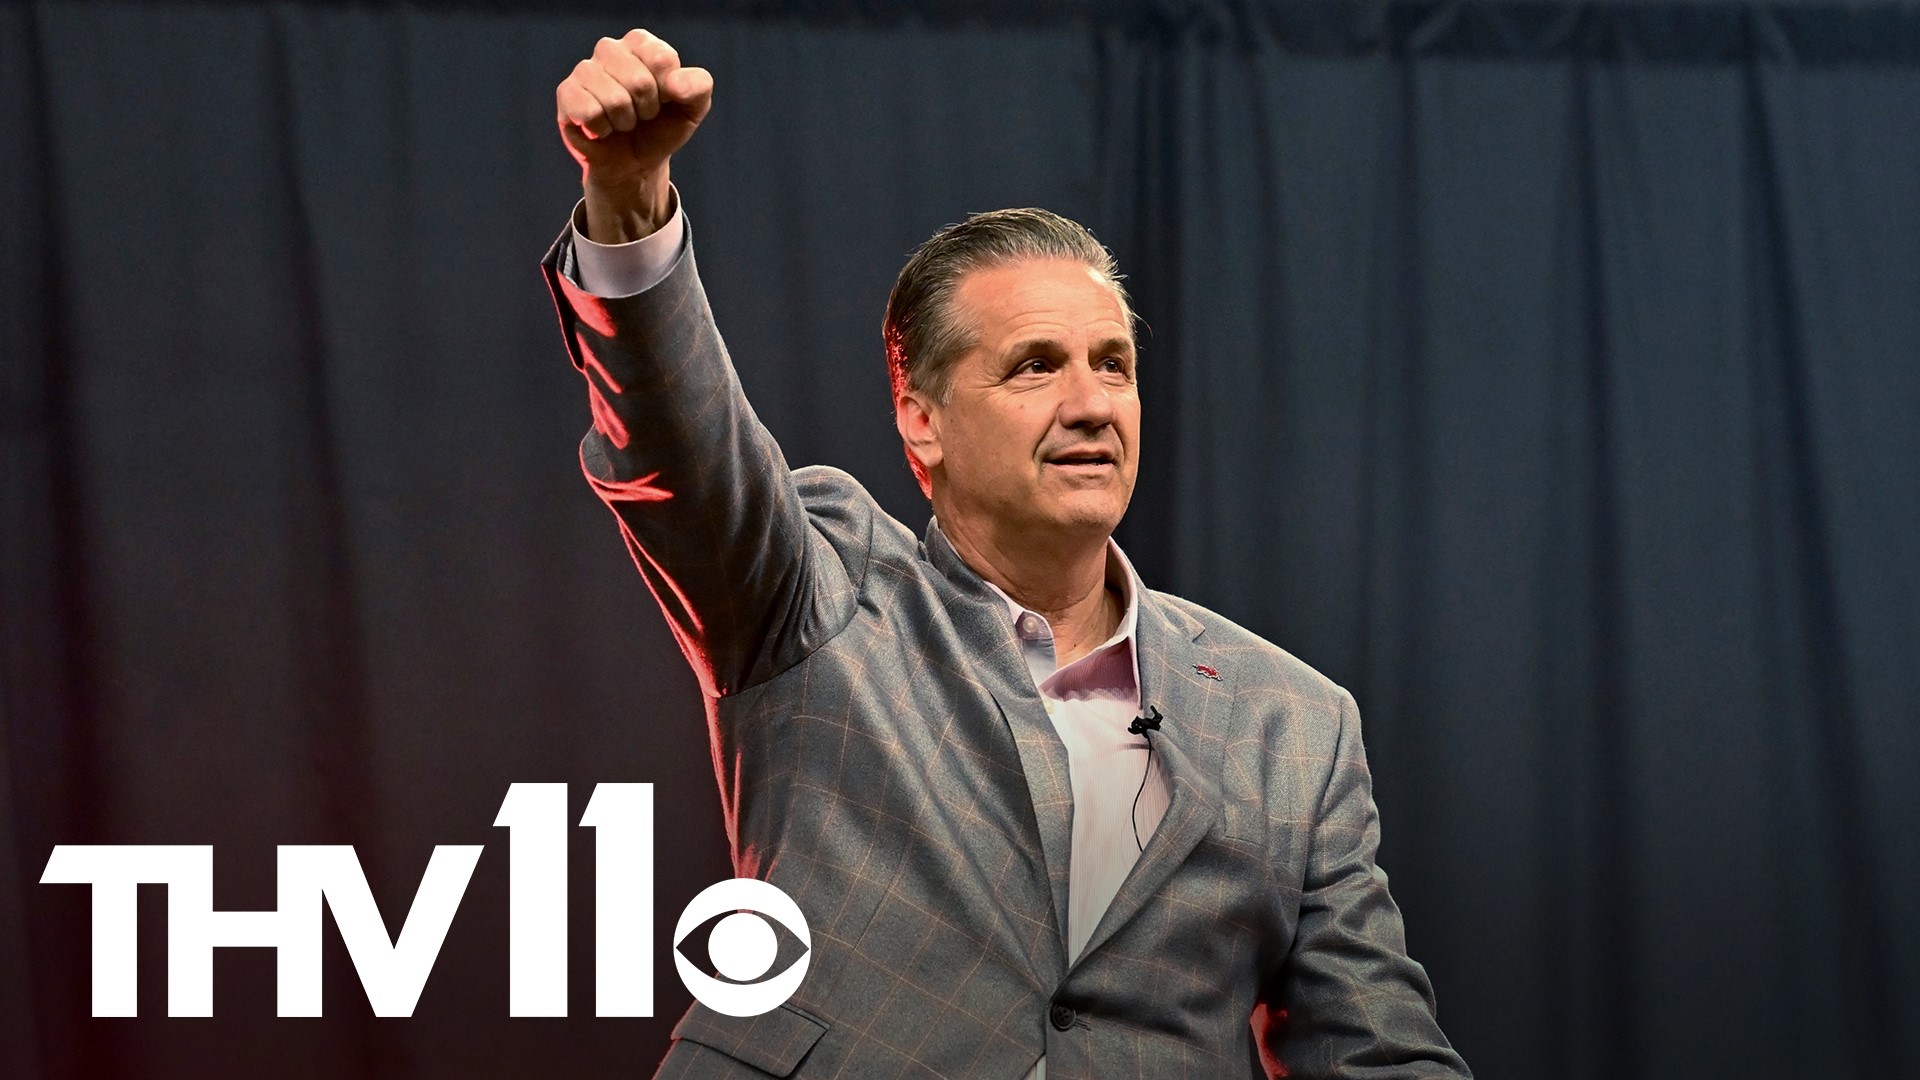 John Calipari called the Hogs at Bud Walton Arena as fans welcomed the four-time national coach of the year to the Hill.